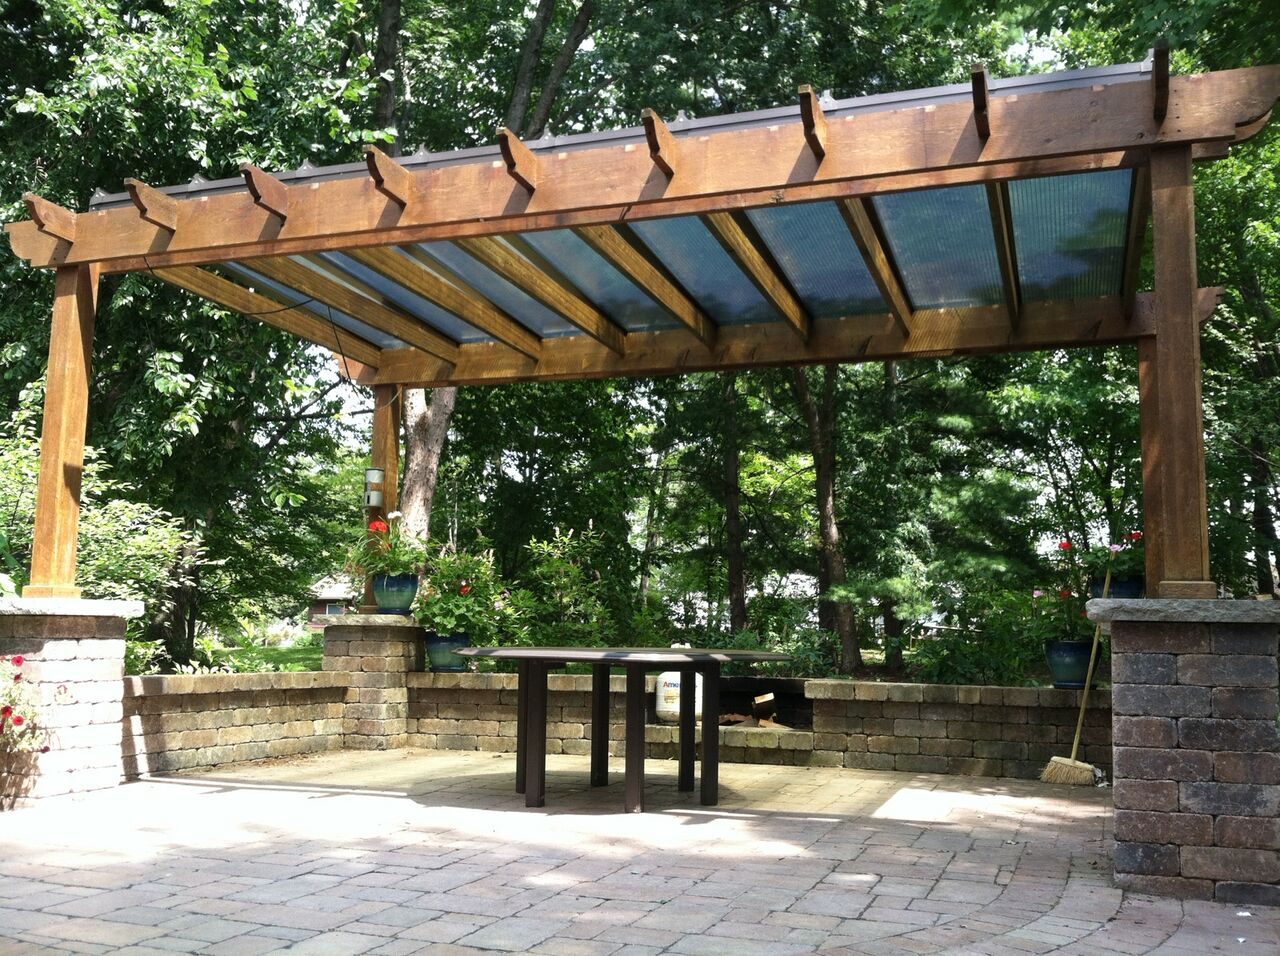 with brightcovers pergola covers you get to enjoy the beautiful design of ENYDERC